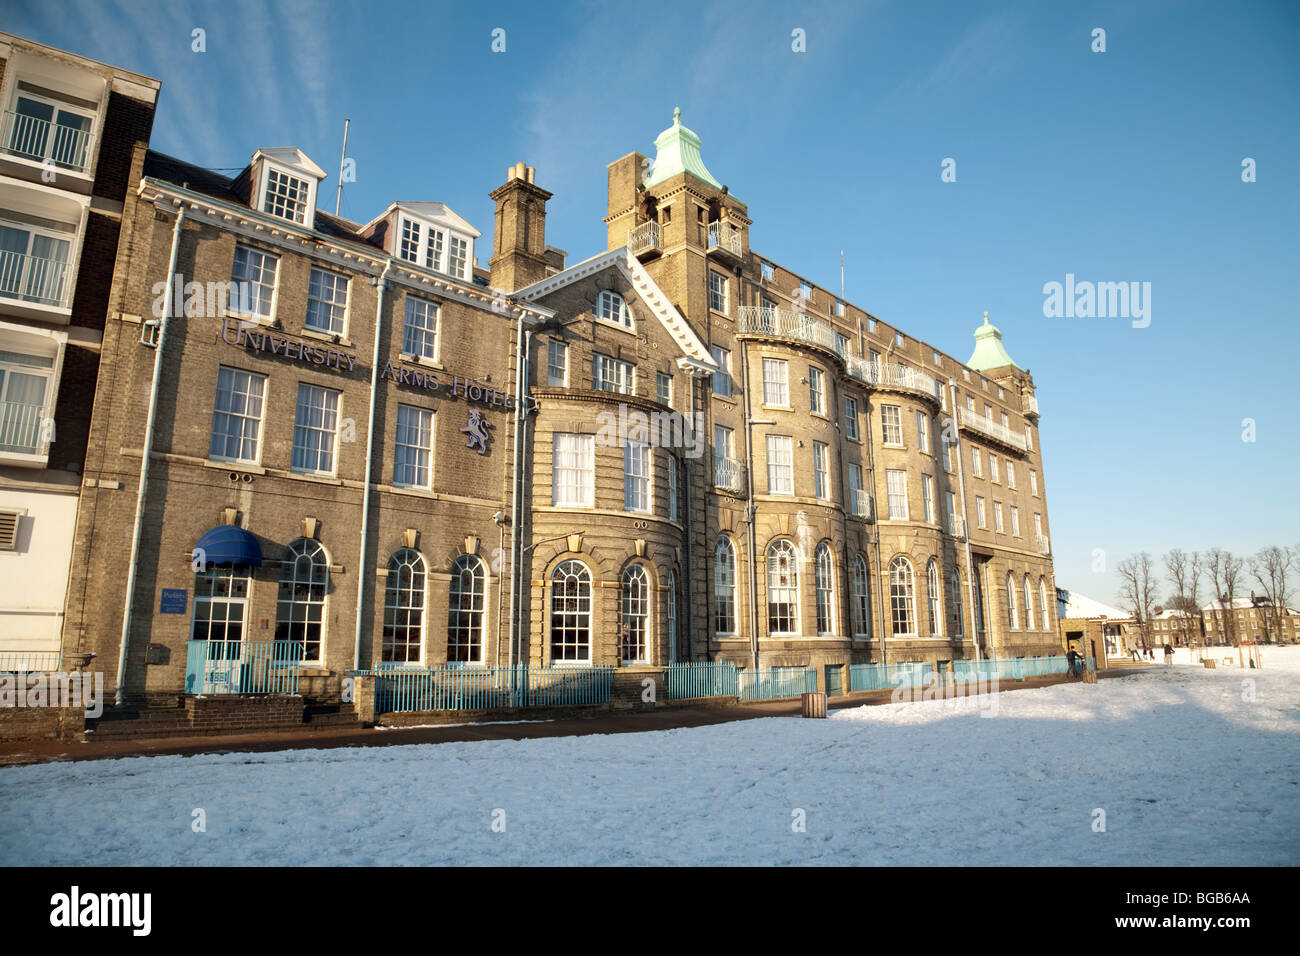 The University Arms Hotel in winter, Parkers Piece, Cambridge, UK Stock Photo